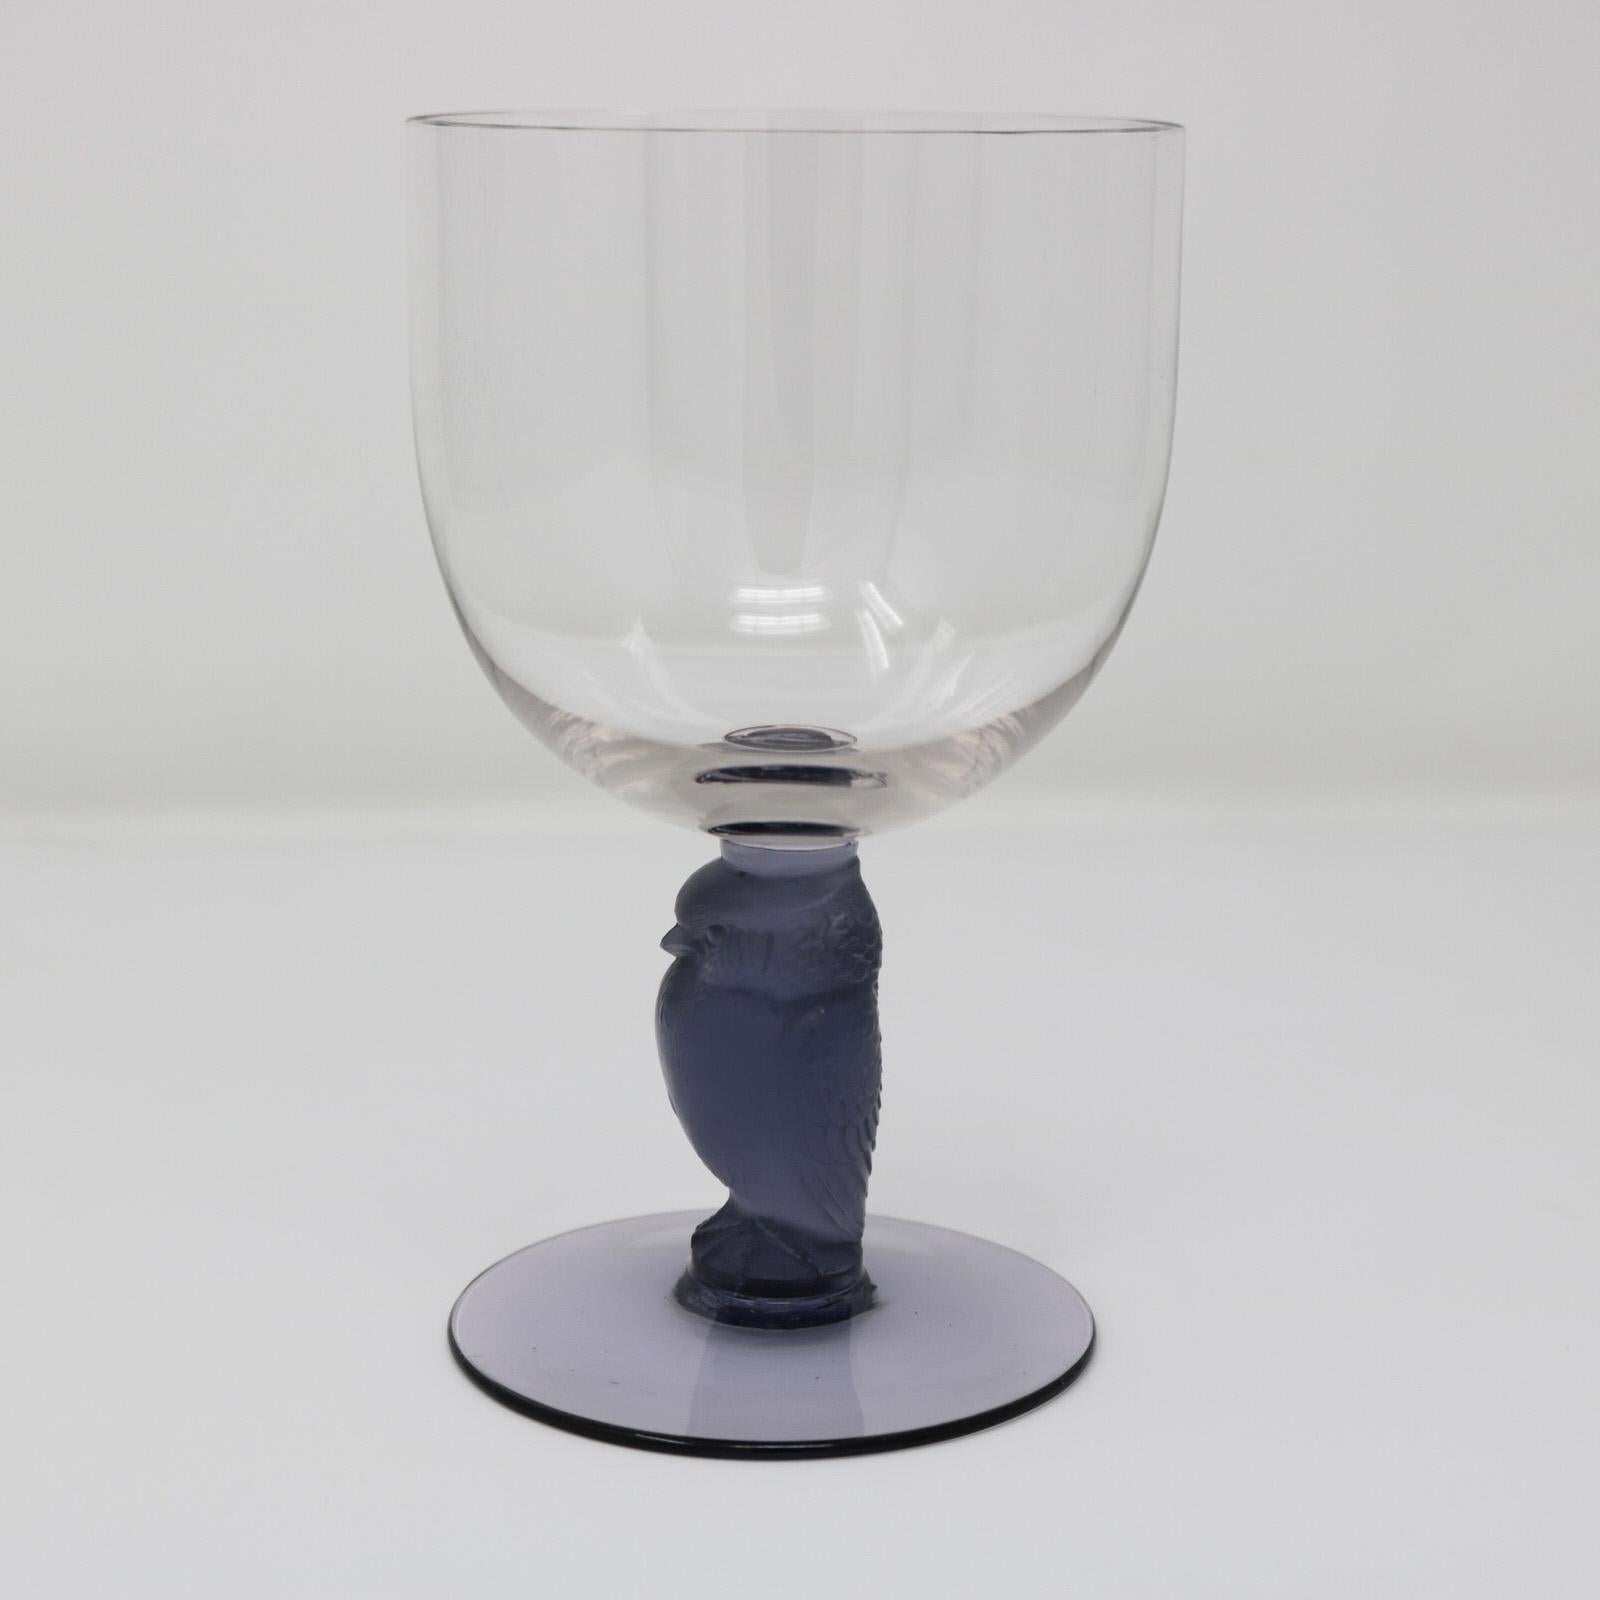 Rene Lalique Glass 'Rapace' Drinking Glass In Excellent Condition For Sale In Chelmsford, Essex